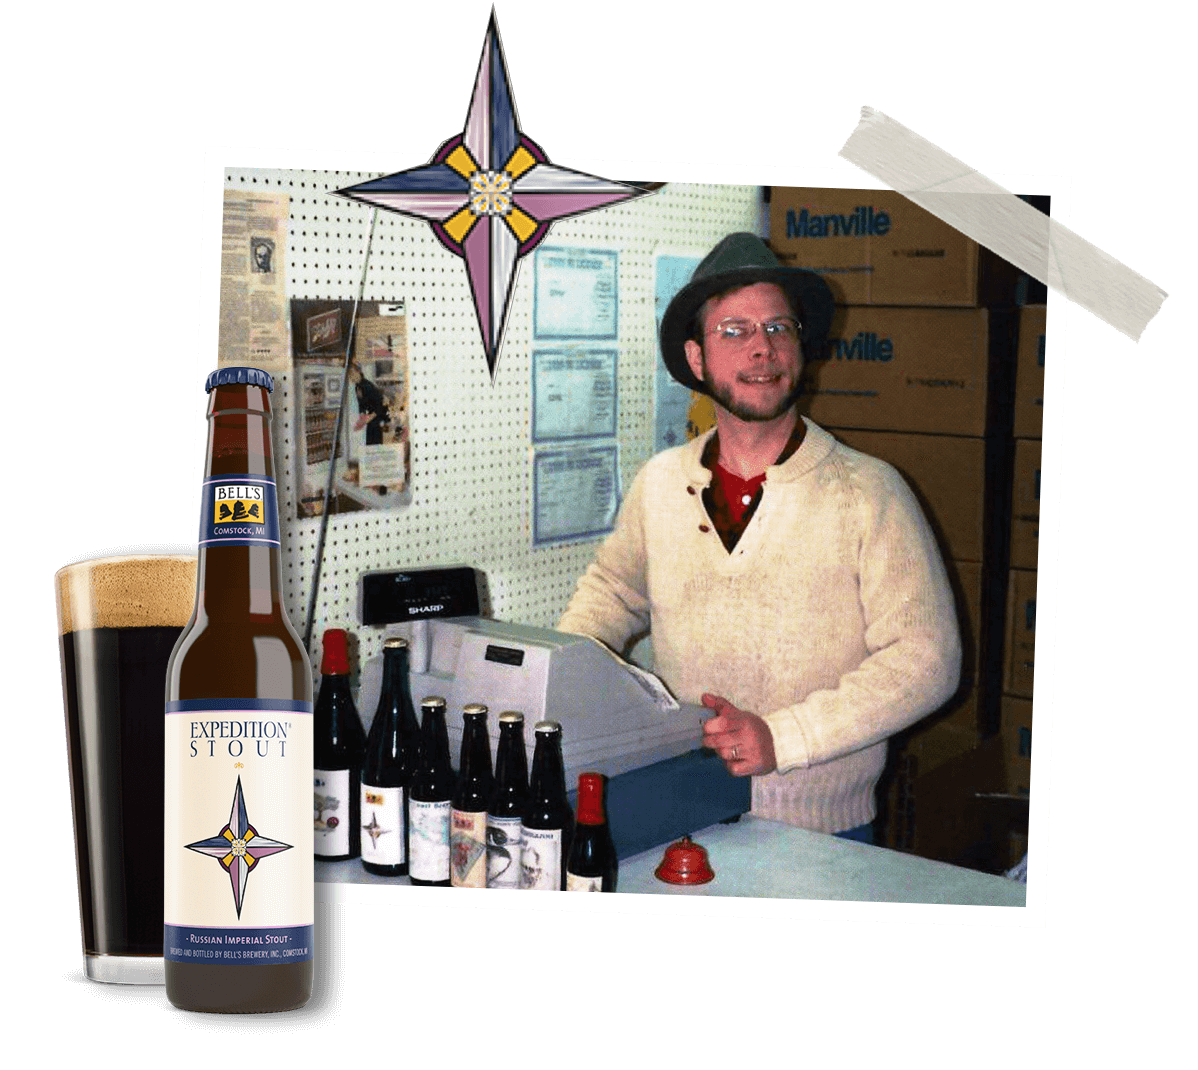 Larry Bell behind a cash register and a bottle of exedition stout